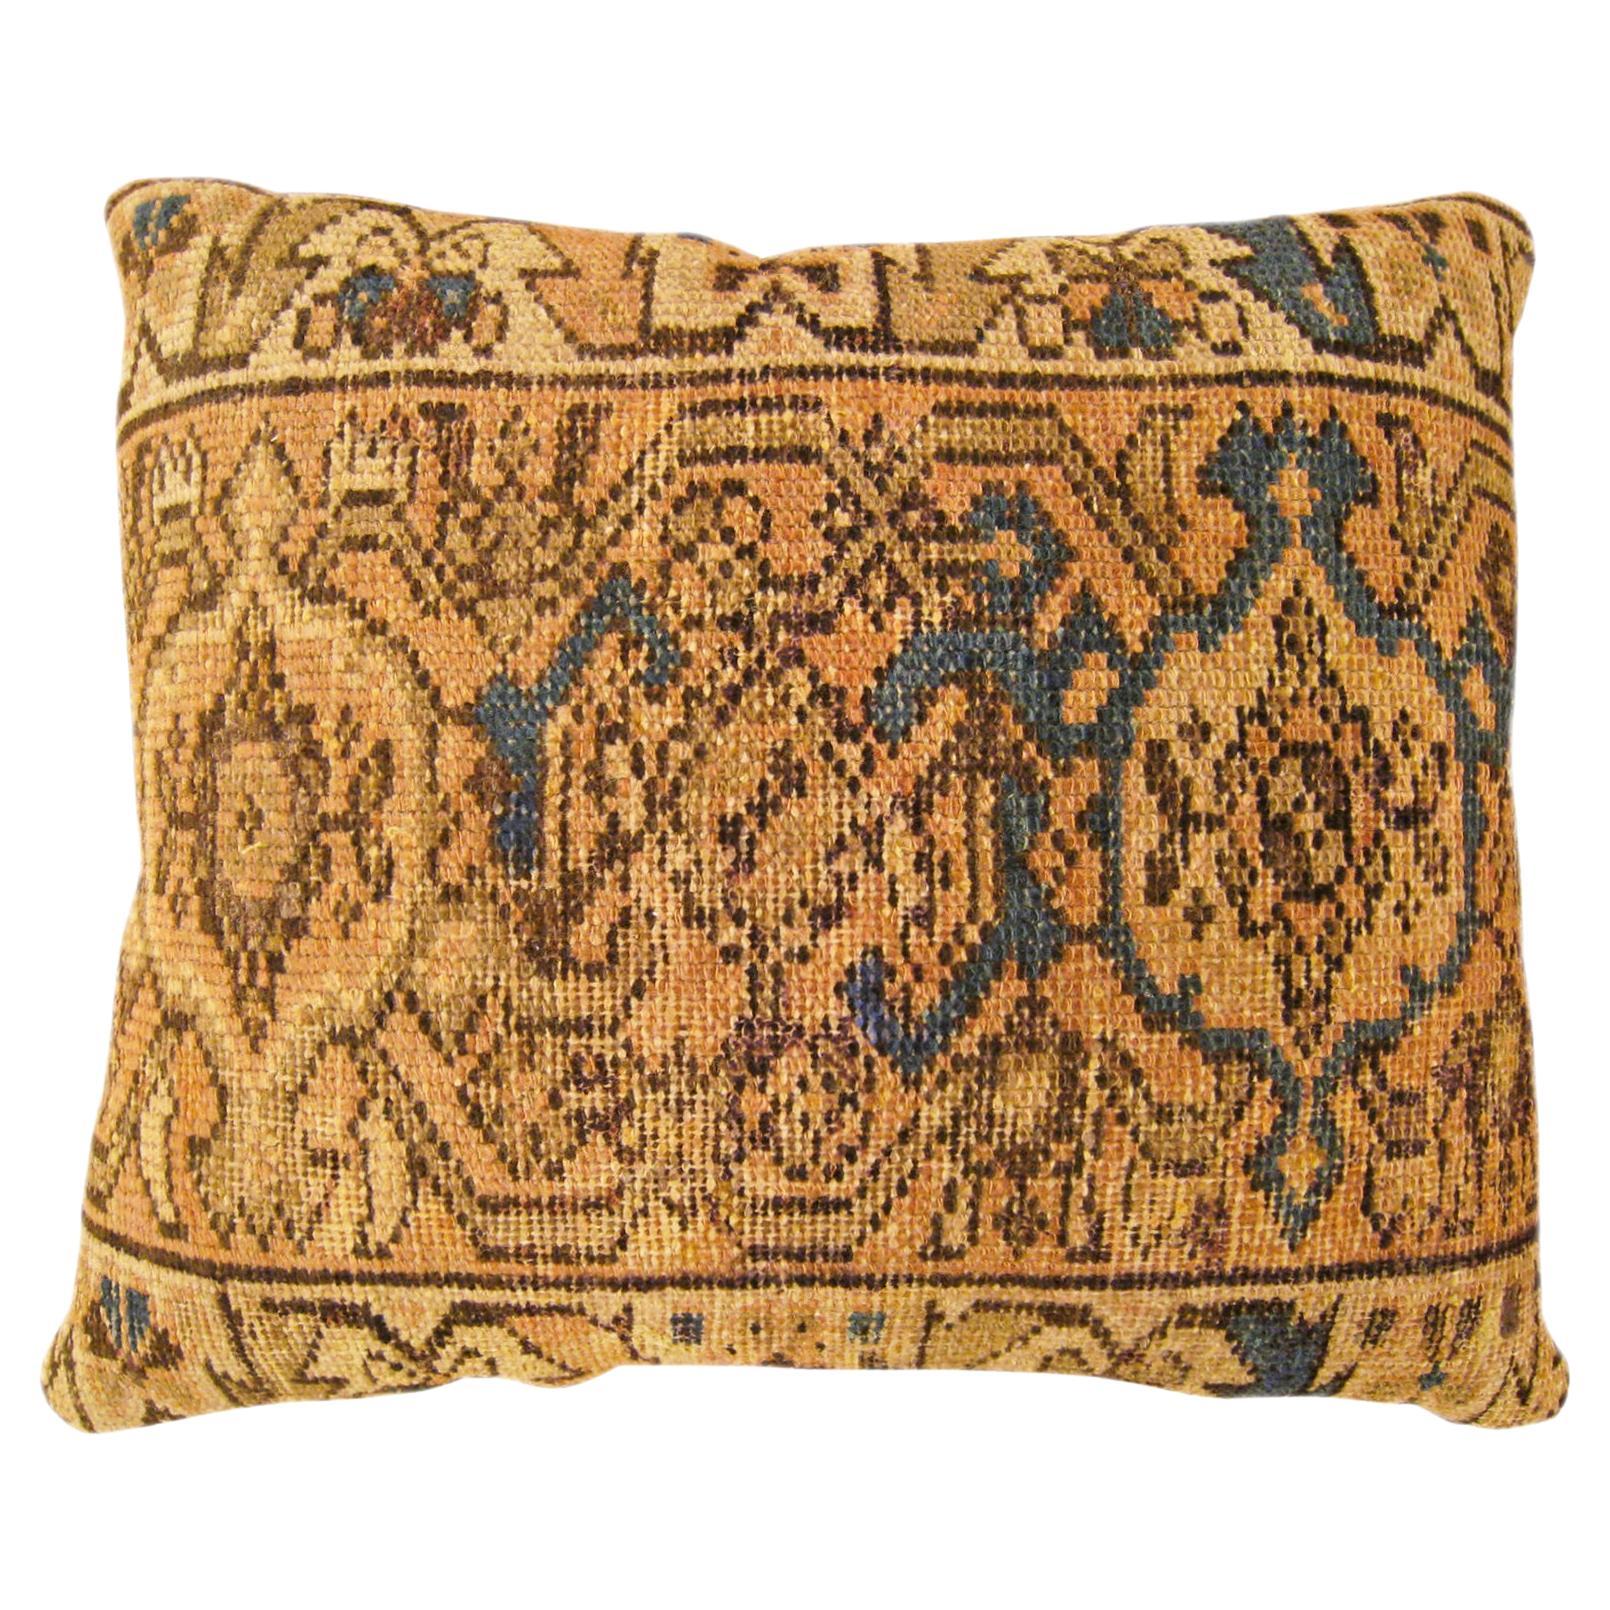 Decorative Antique Persian Hamadan Rug Pillow with Geometric Abstracts Allover